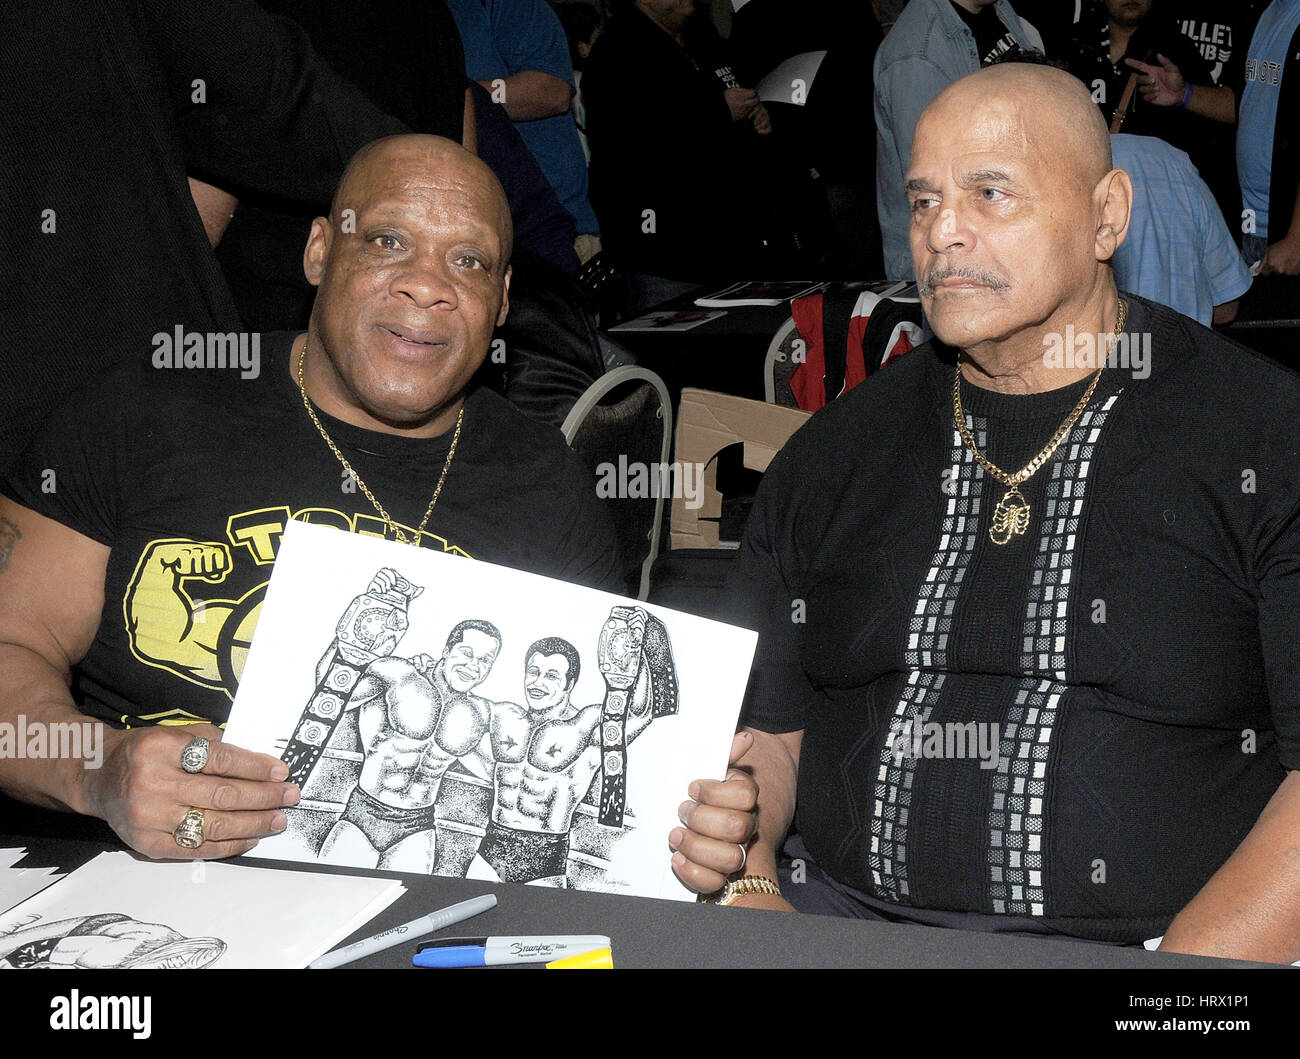 NEW YORK, NY - MARCH 04: Hall of Fame members Tony Atlas and Rocky Johnson  attends the "Big Event" at the LaGuardia Plaza Hotel on March 4, 2017 in  New York City.